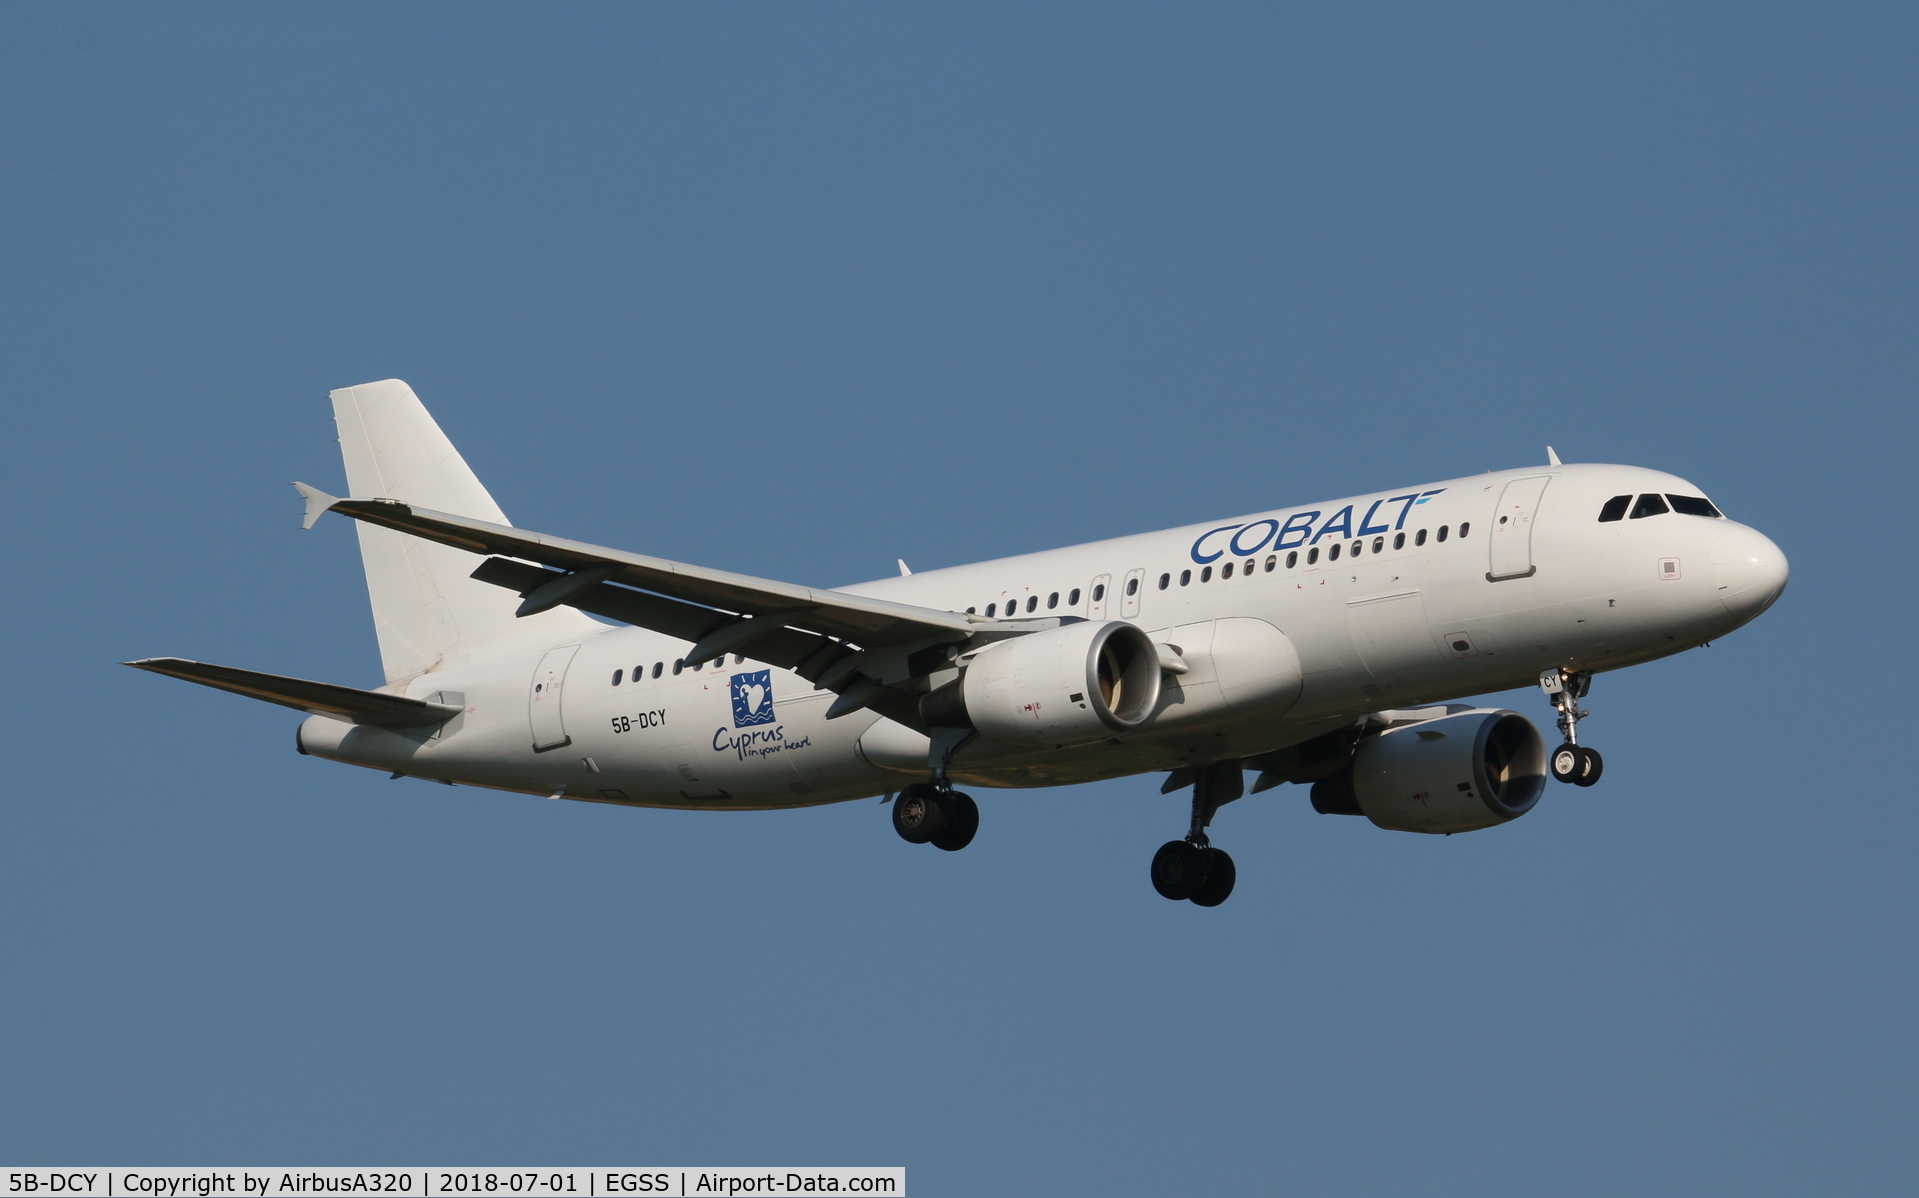 5B-DCY, 2006 Airbus A320-214 C/N 2920, arriving stansted